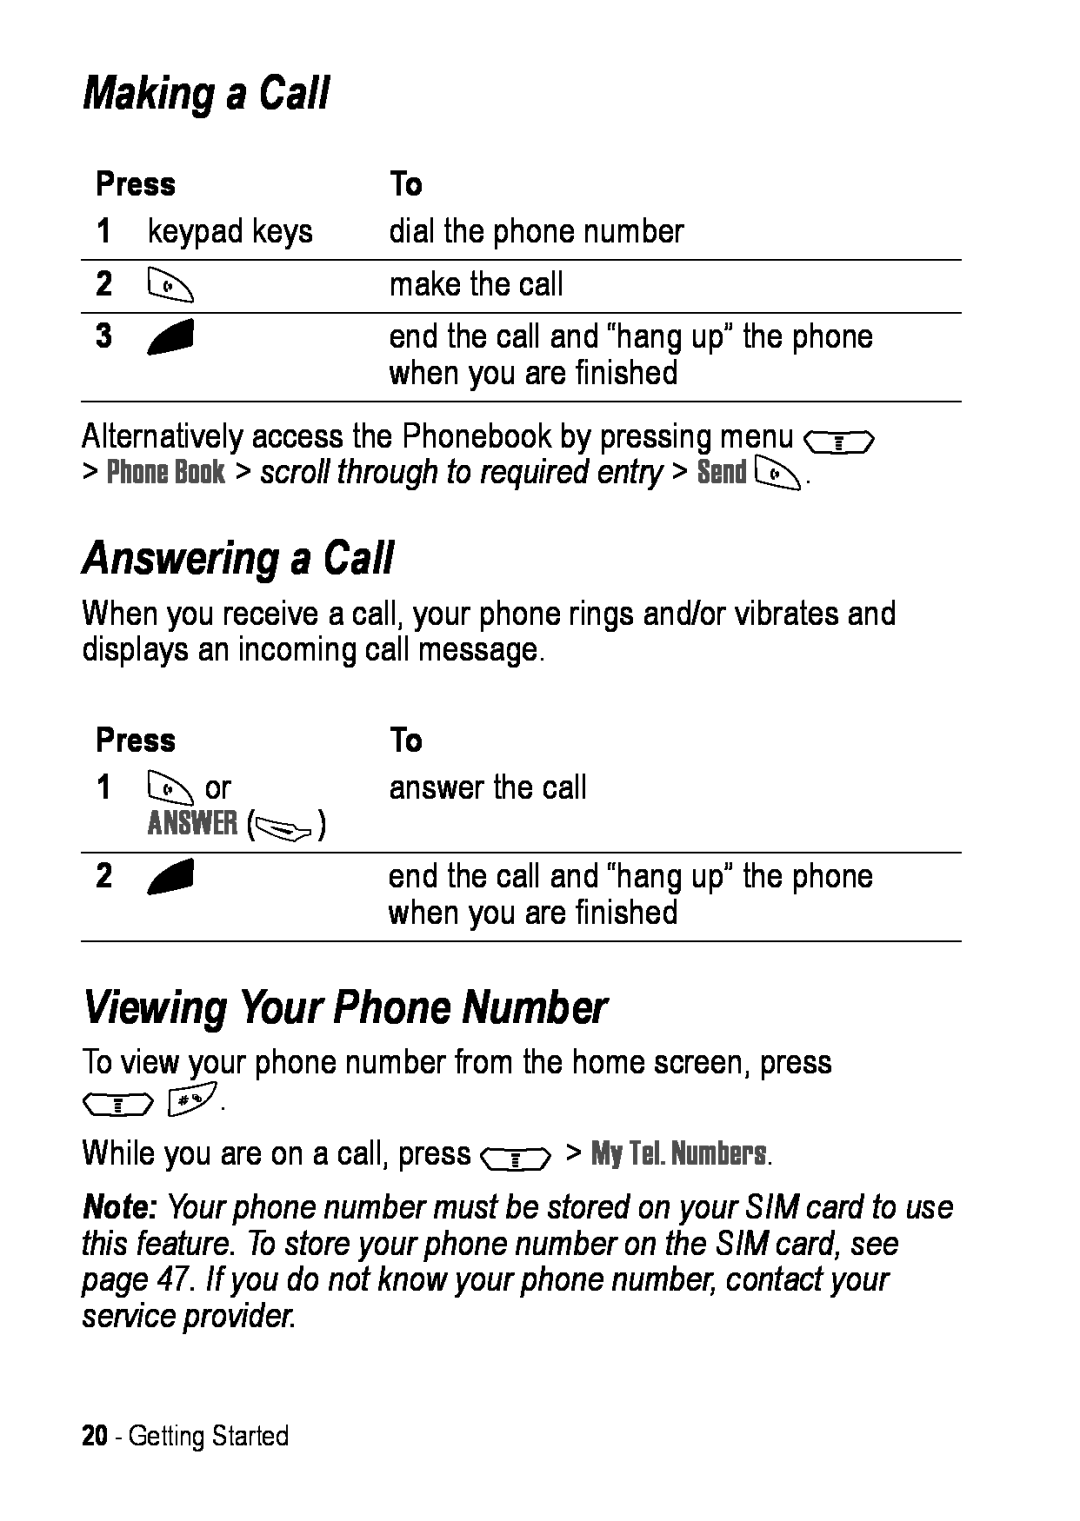 Motorola C390 manual Making a Call, Answering a Call, Viewing Your Phone Number 